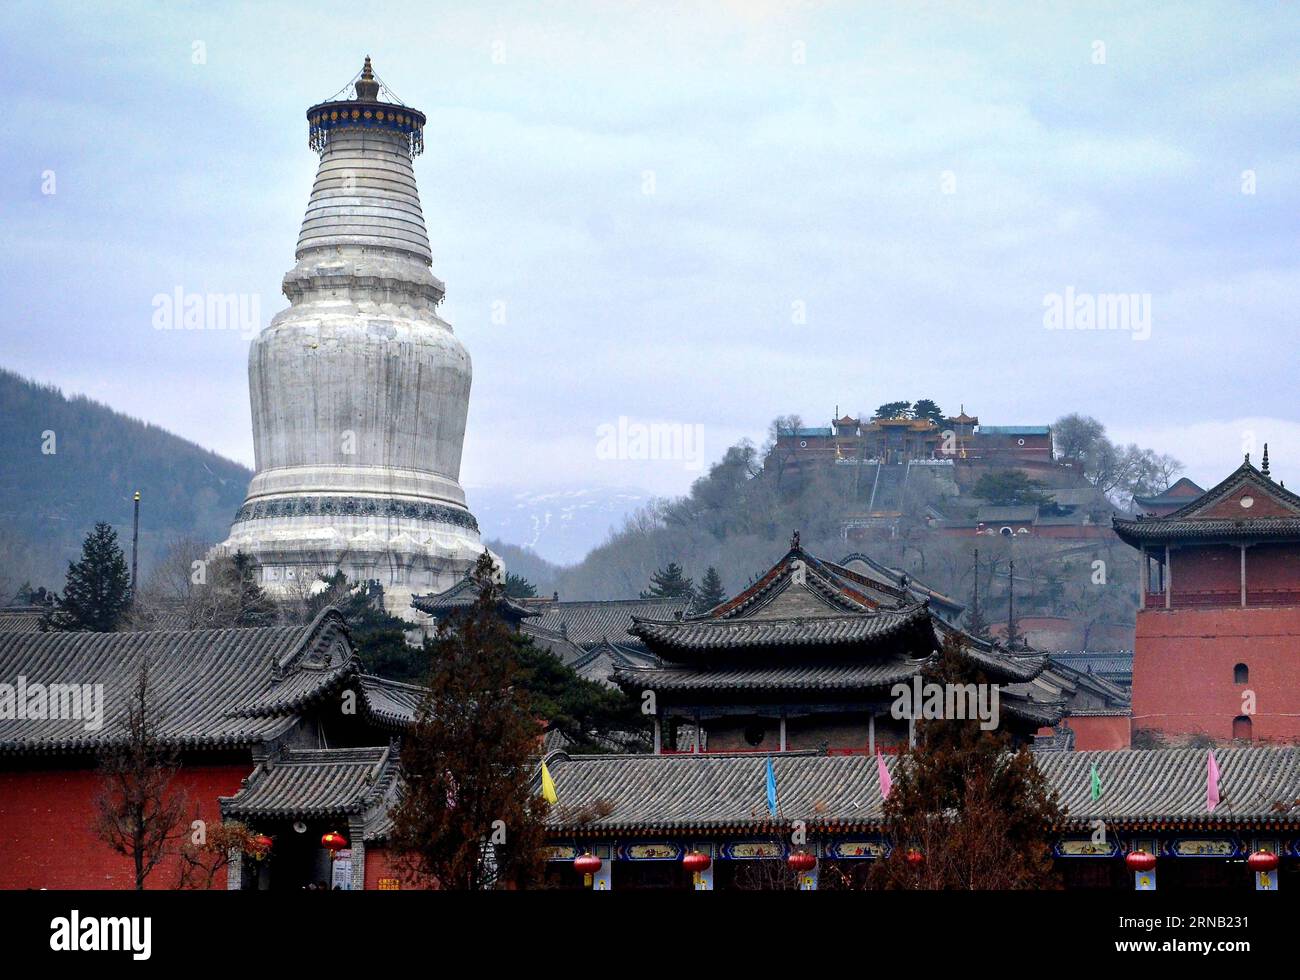 Photo taken on Nov. 3, 2011 shows the White Pagoda at the Tayuan Monastery on Mount Wutai, one of four sacred Buddhist mountains in China, in north China s Shanxi Province. The pagoda was built in the year of 1302 of Yuan Dynasty.) (ry) CHINA-ANCIENT PAGODAS (CN) WangxSong PUBLICATIONxNOTxINxCHN   Photo Taken ON Nov 3 2011 Shows The White Pagoda AT The Tayuan monastery ON Mount Wutai One of Four Sacred Buddhist Mountains in China in North China S Shanxi Province The Pagoda what built in The Year of 1302 of Yuan Dynasty Ry China Ancient Pagodas CN WangxSong PUBLICATIONxNOTxINxCHN Stock Photo